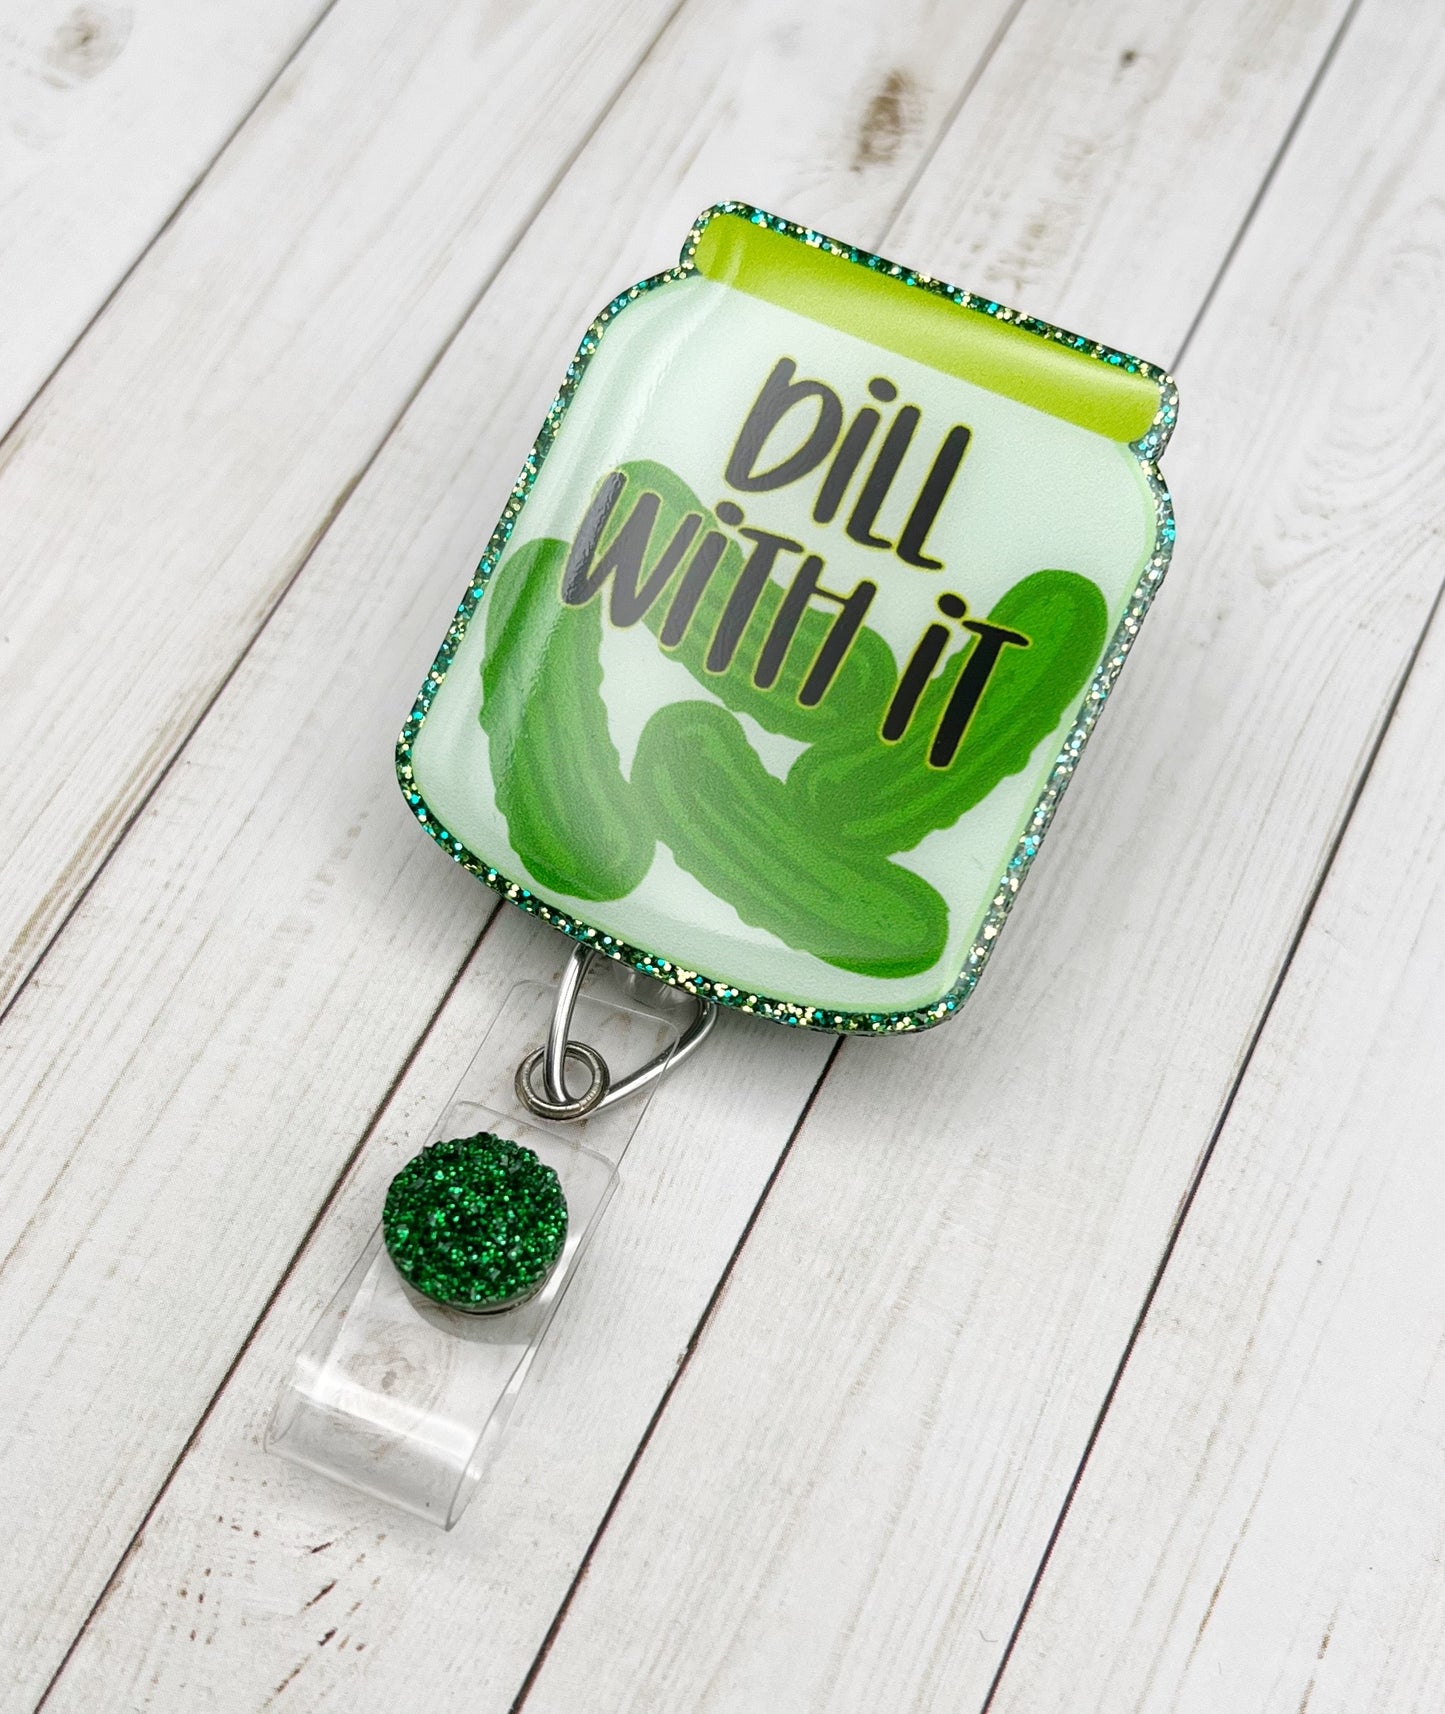 Dill With It Pickle Jar